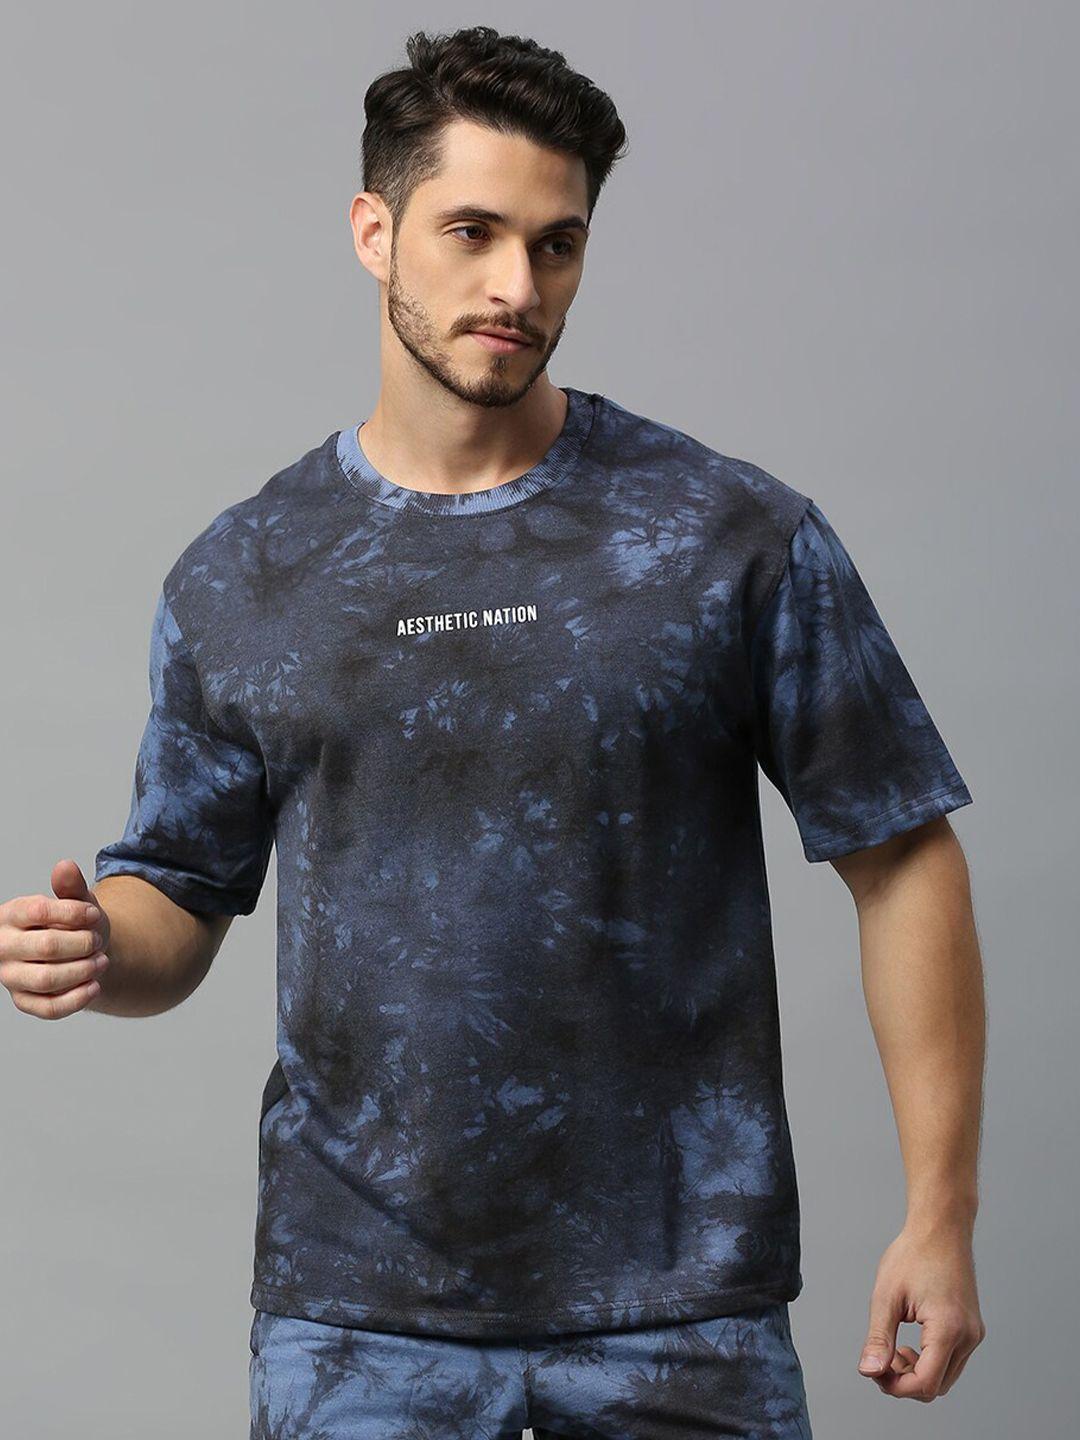 aesthetic nation tie and dye printed round neck cotton oversized t-shirt